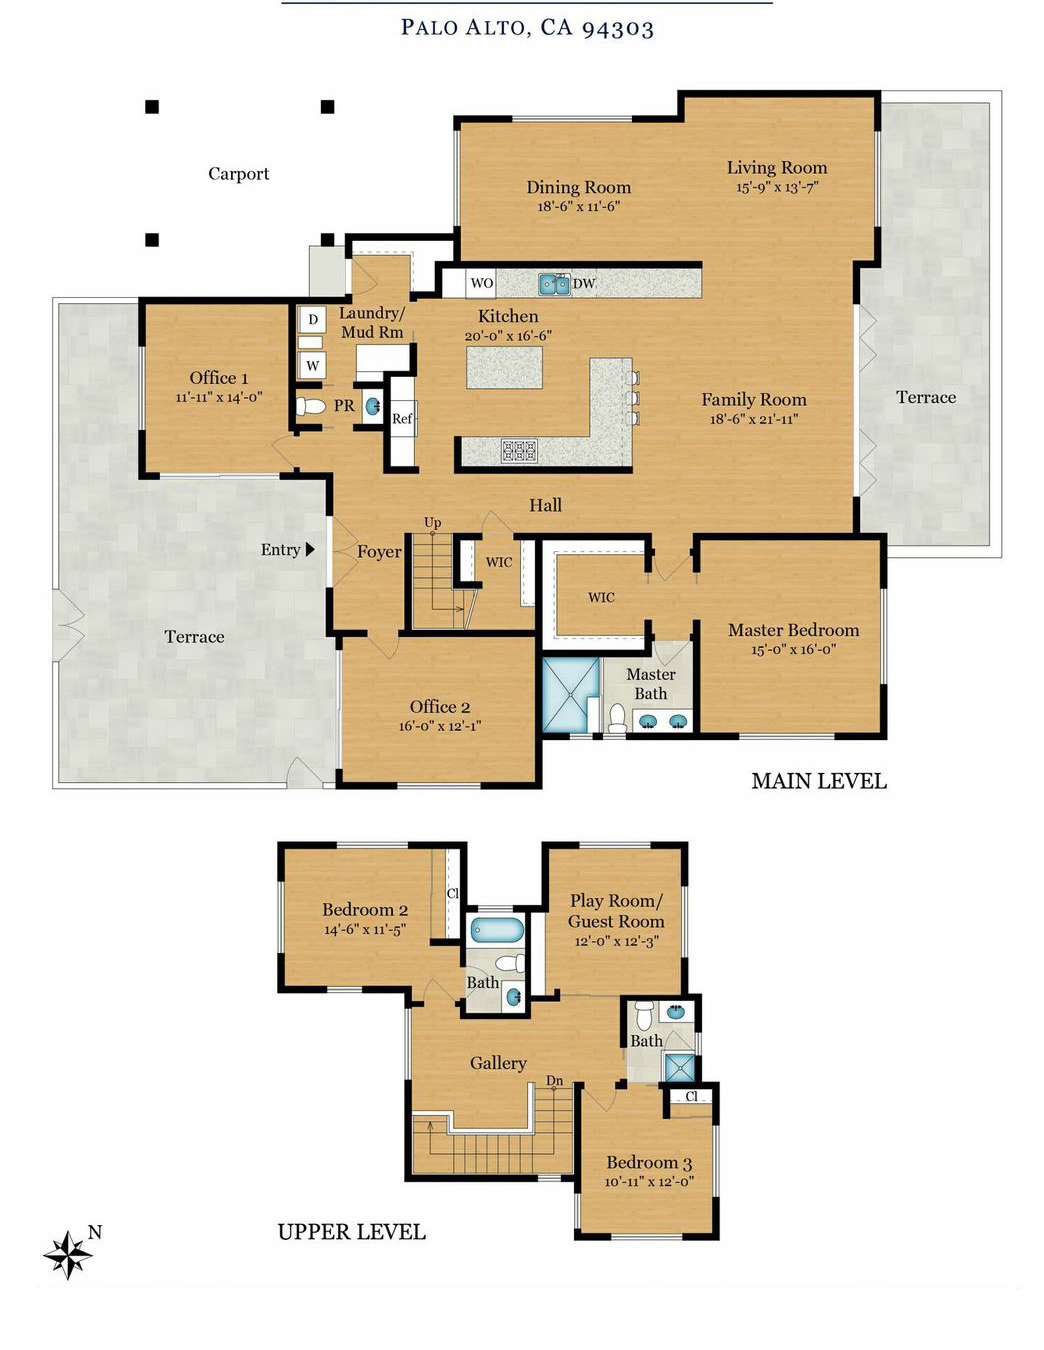 Floor plans for the new house built in Palo Alto